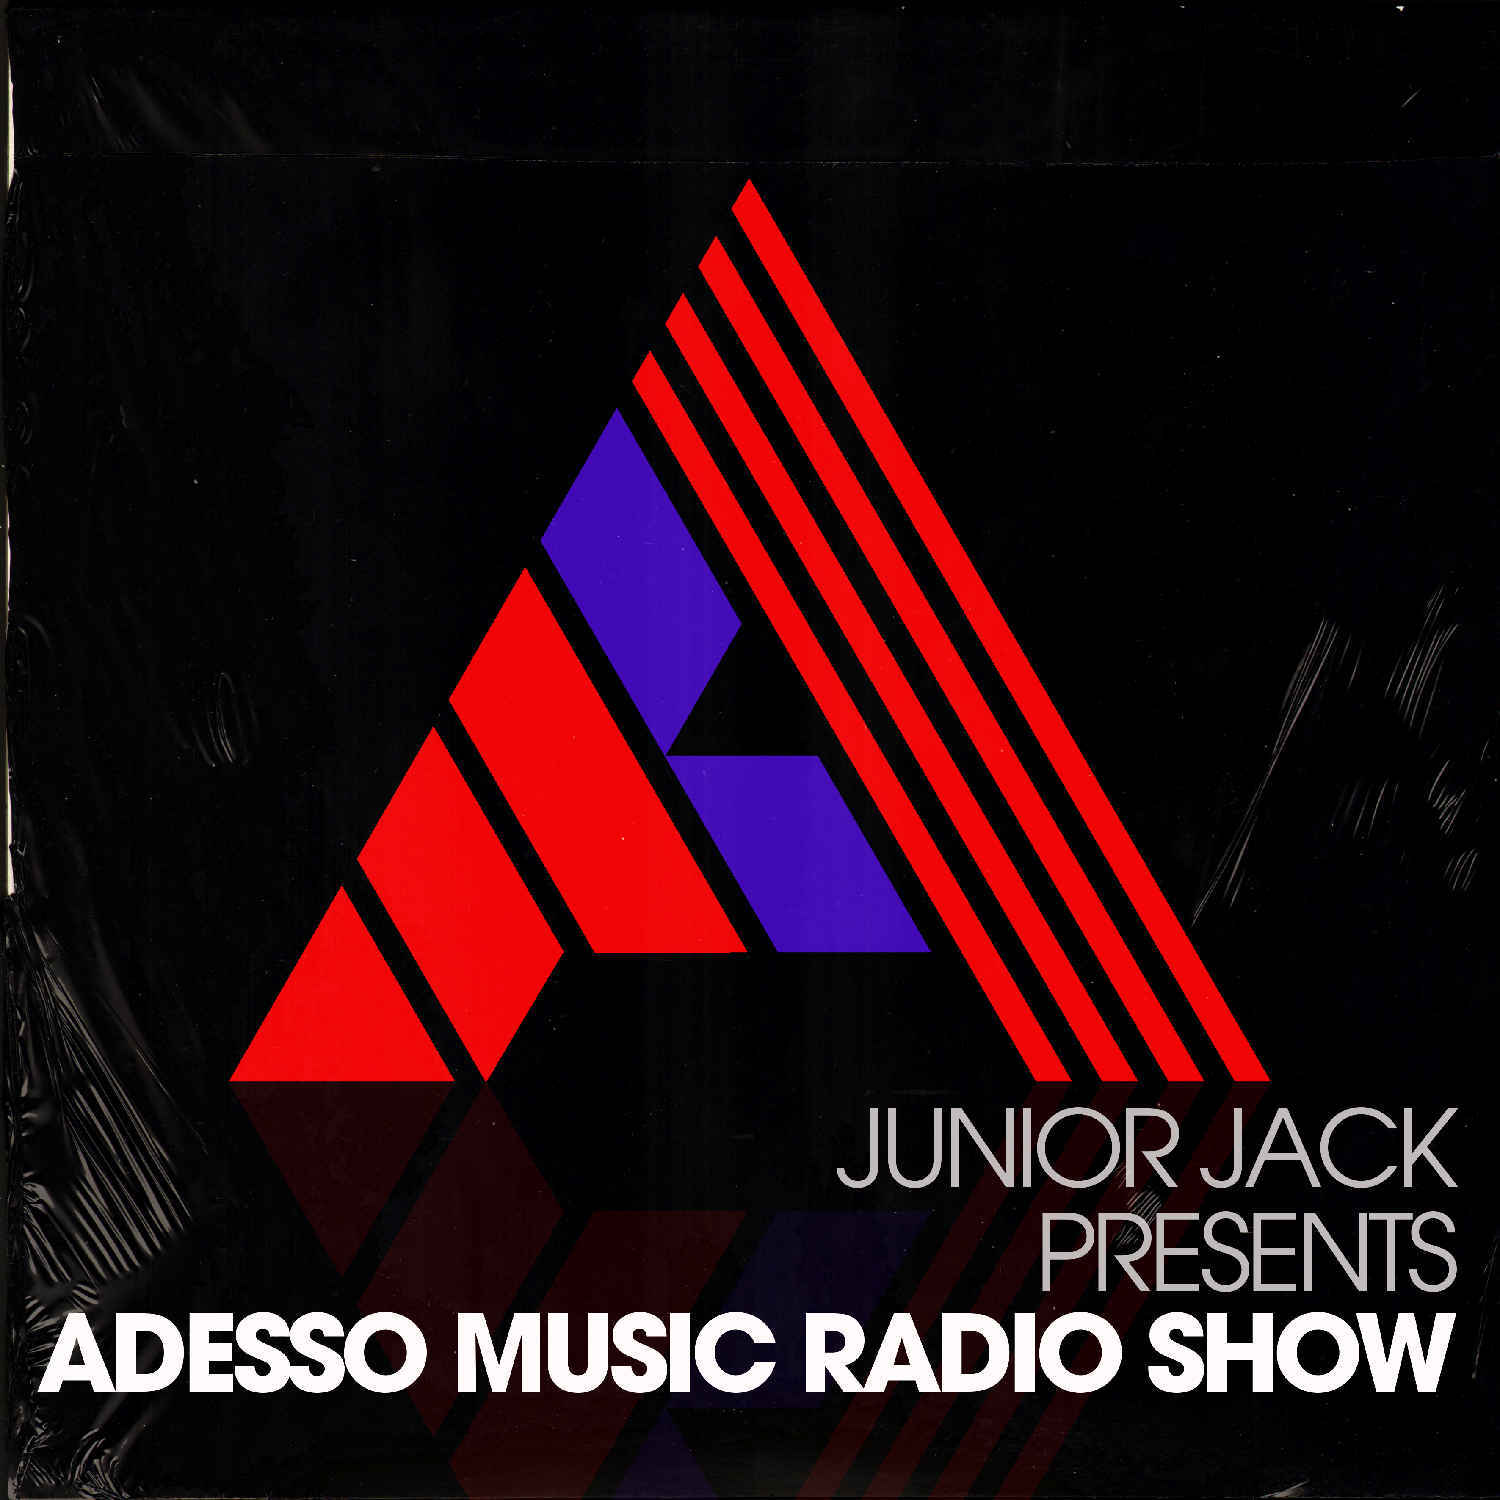 Adesso Music Radio Show Friday at 7 a.m. CET